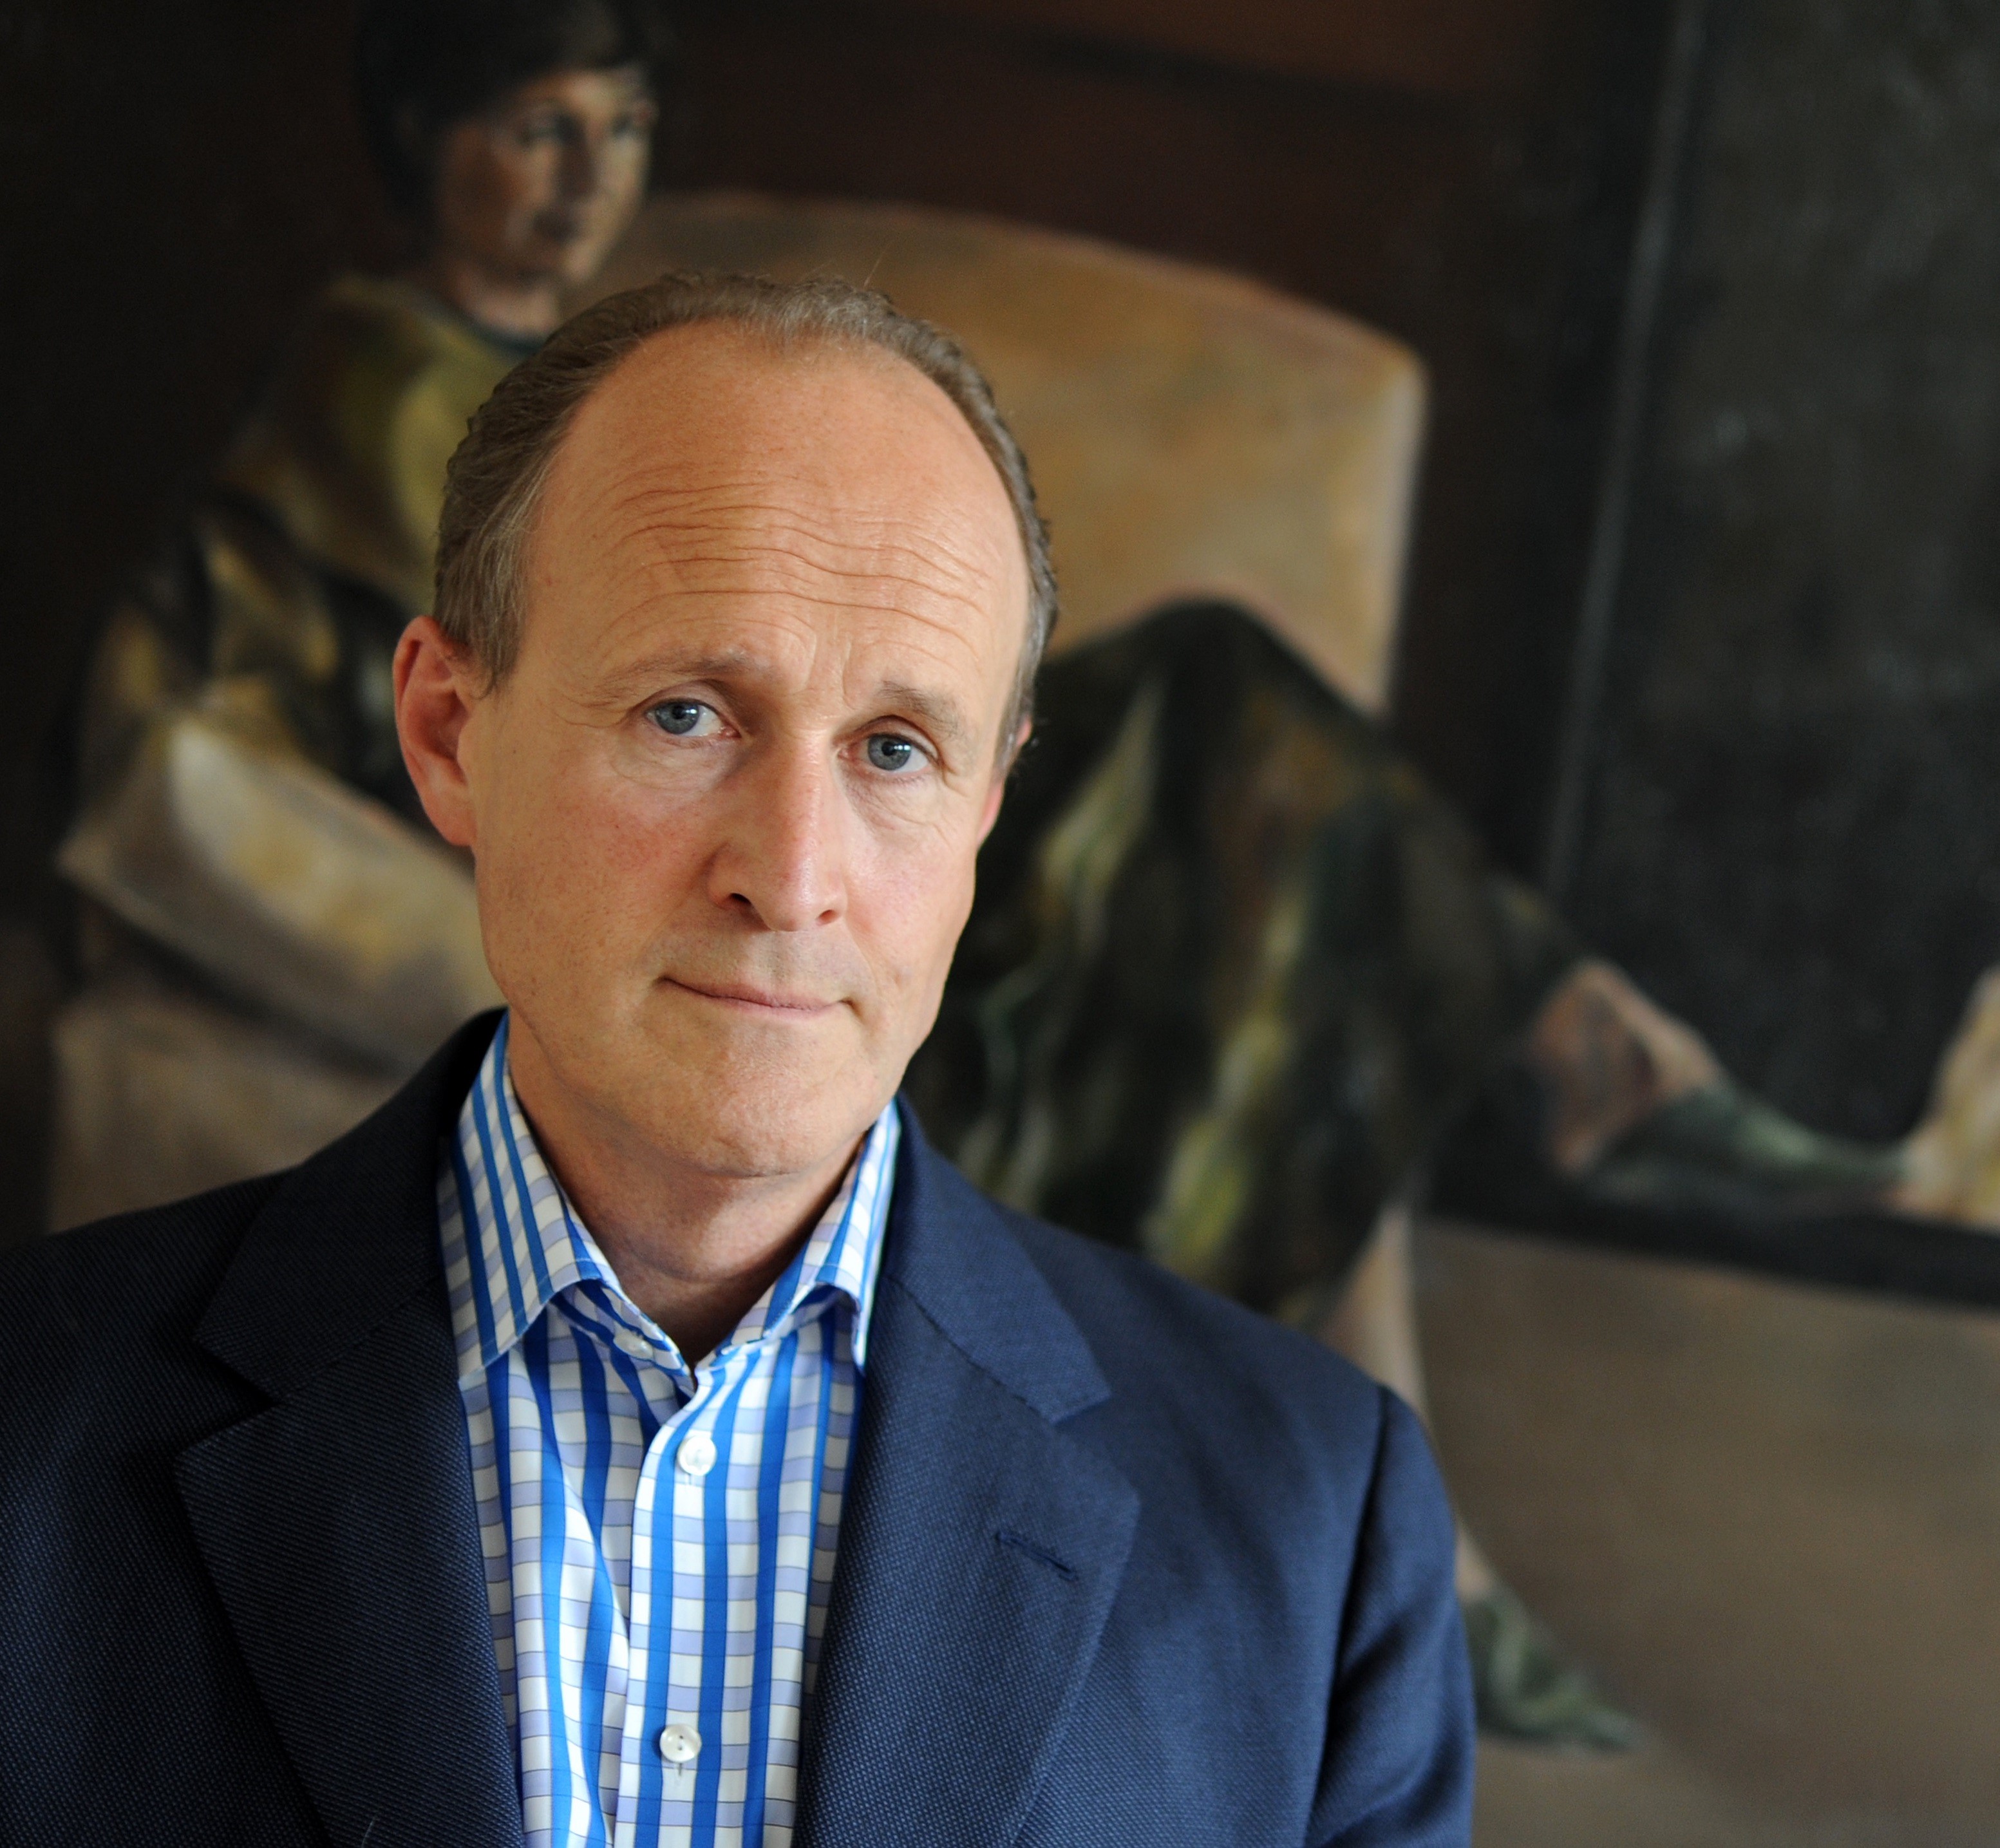 Sir Peter Bazalgette, non-executive Chair of ITV, to speak at The Printing Charity’s Annual Luncheon